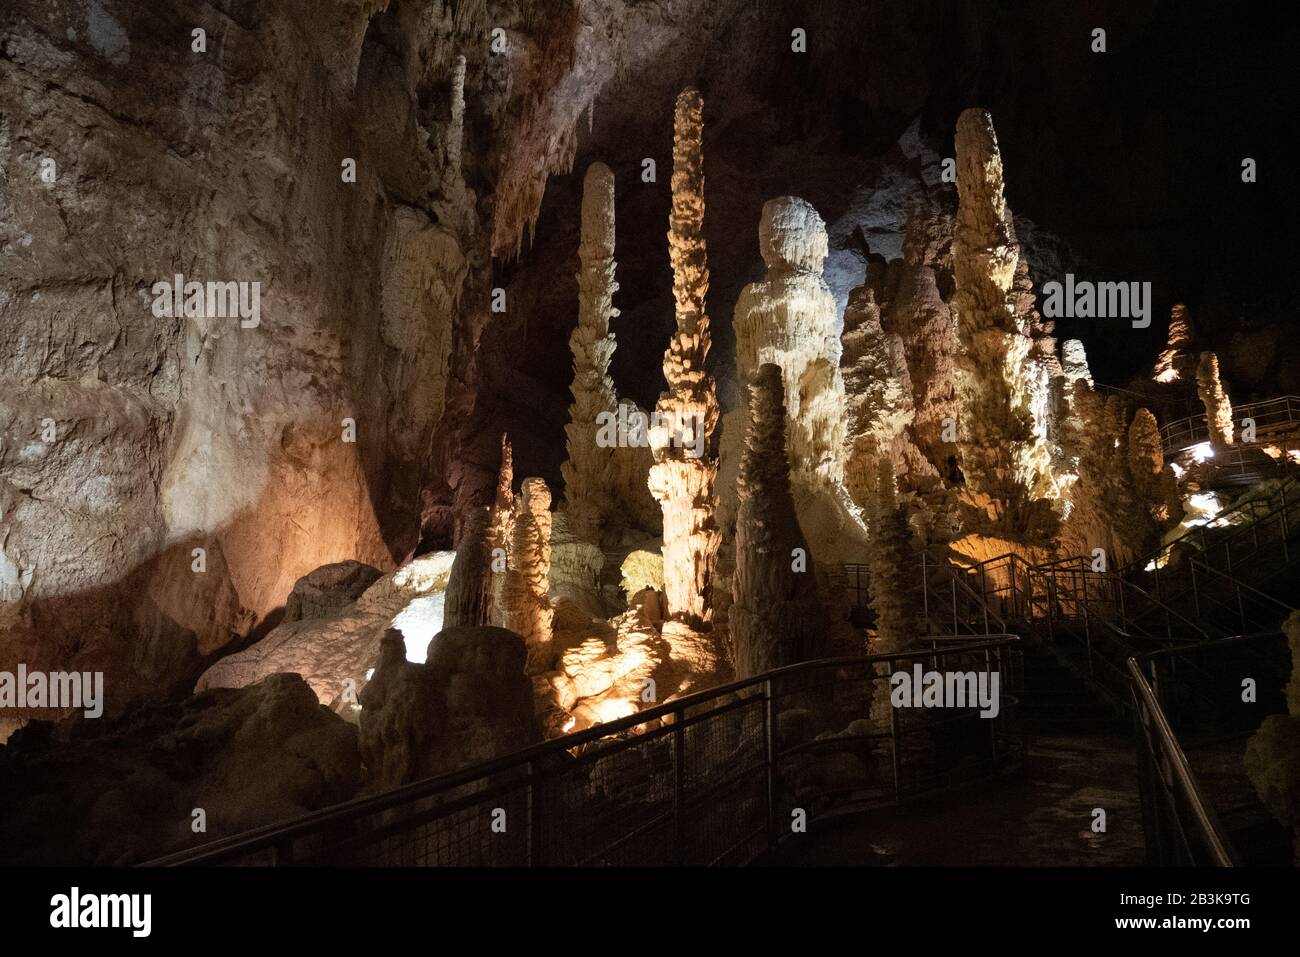 https://c8.alamy.com/comp/2B3K9TG/italy-marche-genga-the-natural-show-of-frasassi-caves-with-sharp-stalactites-and-stalagmites-2B3K9TG.jpg